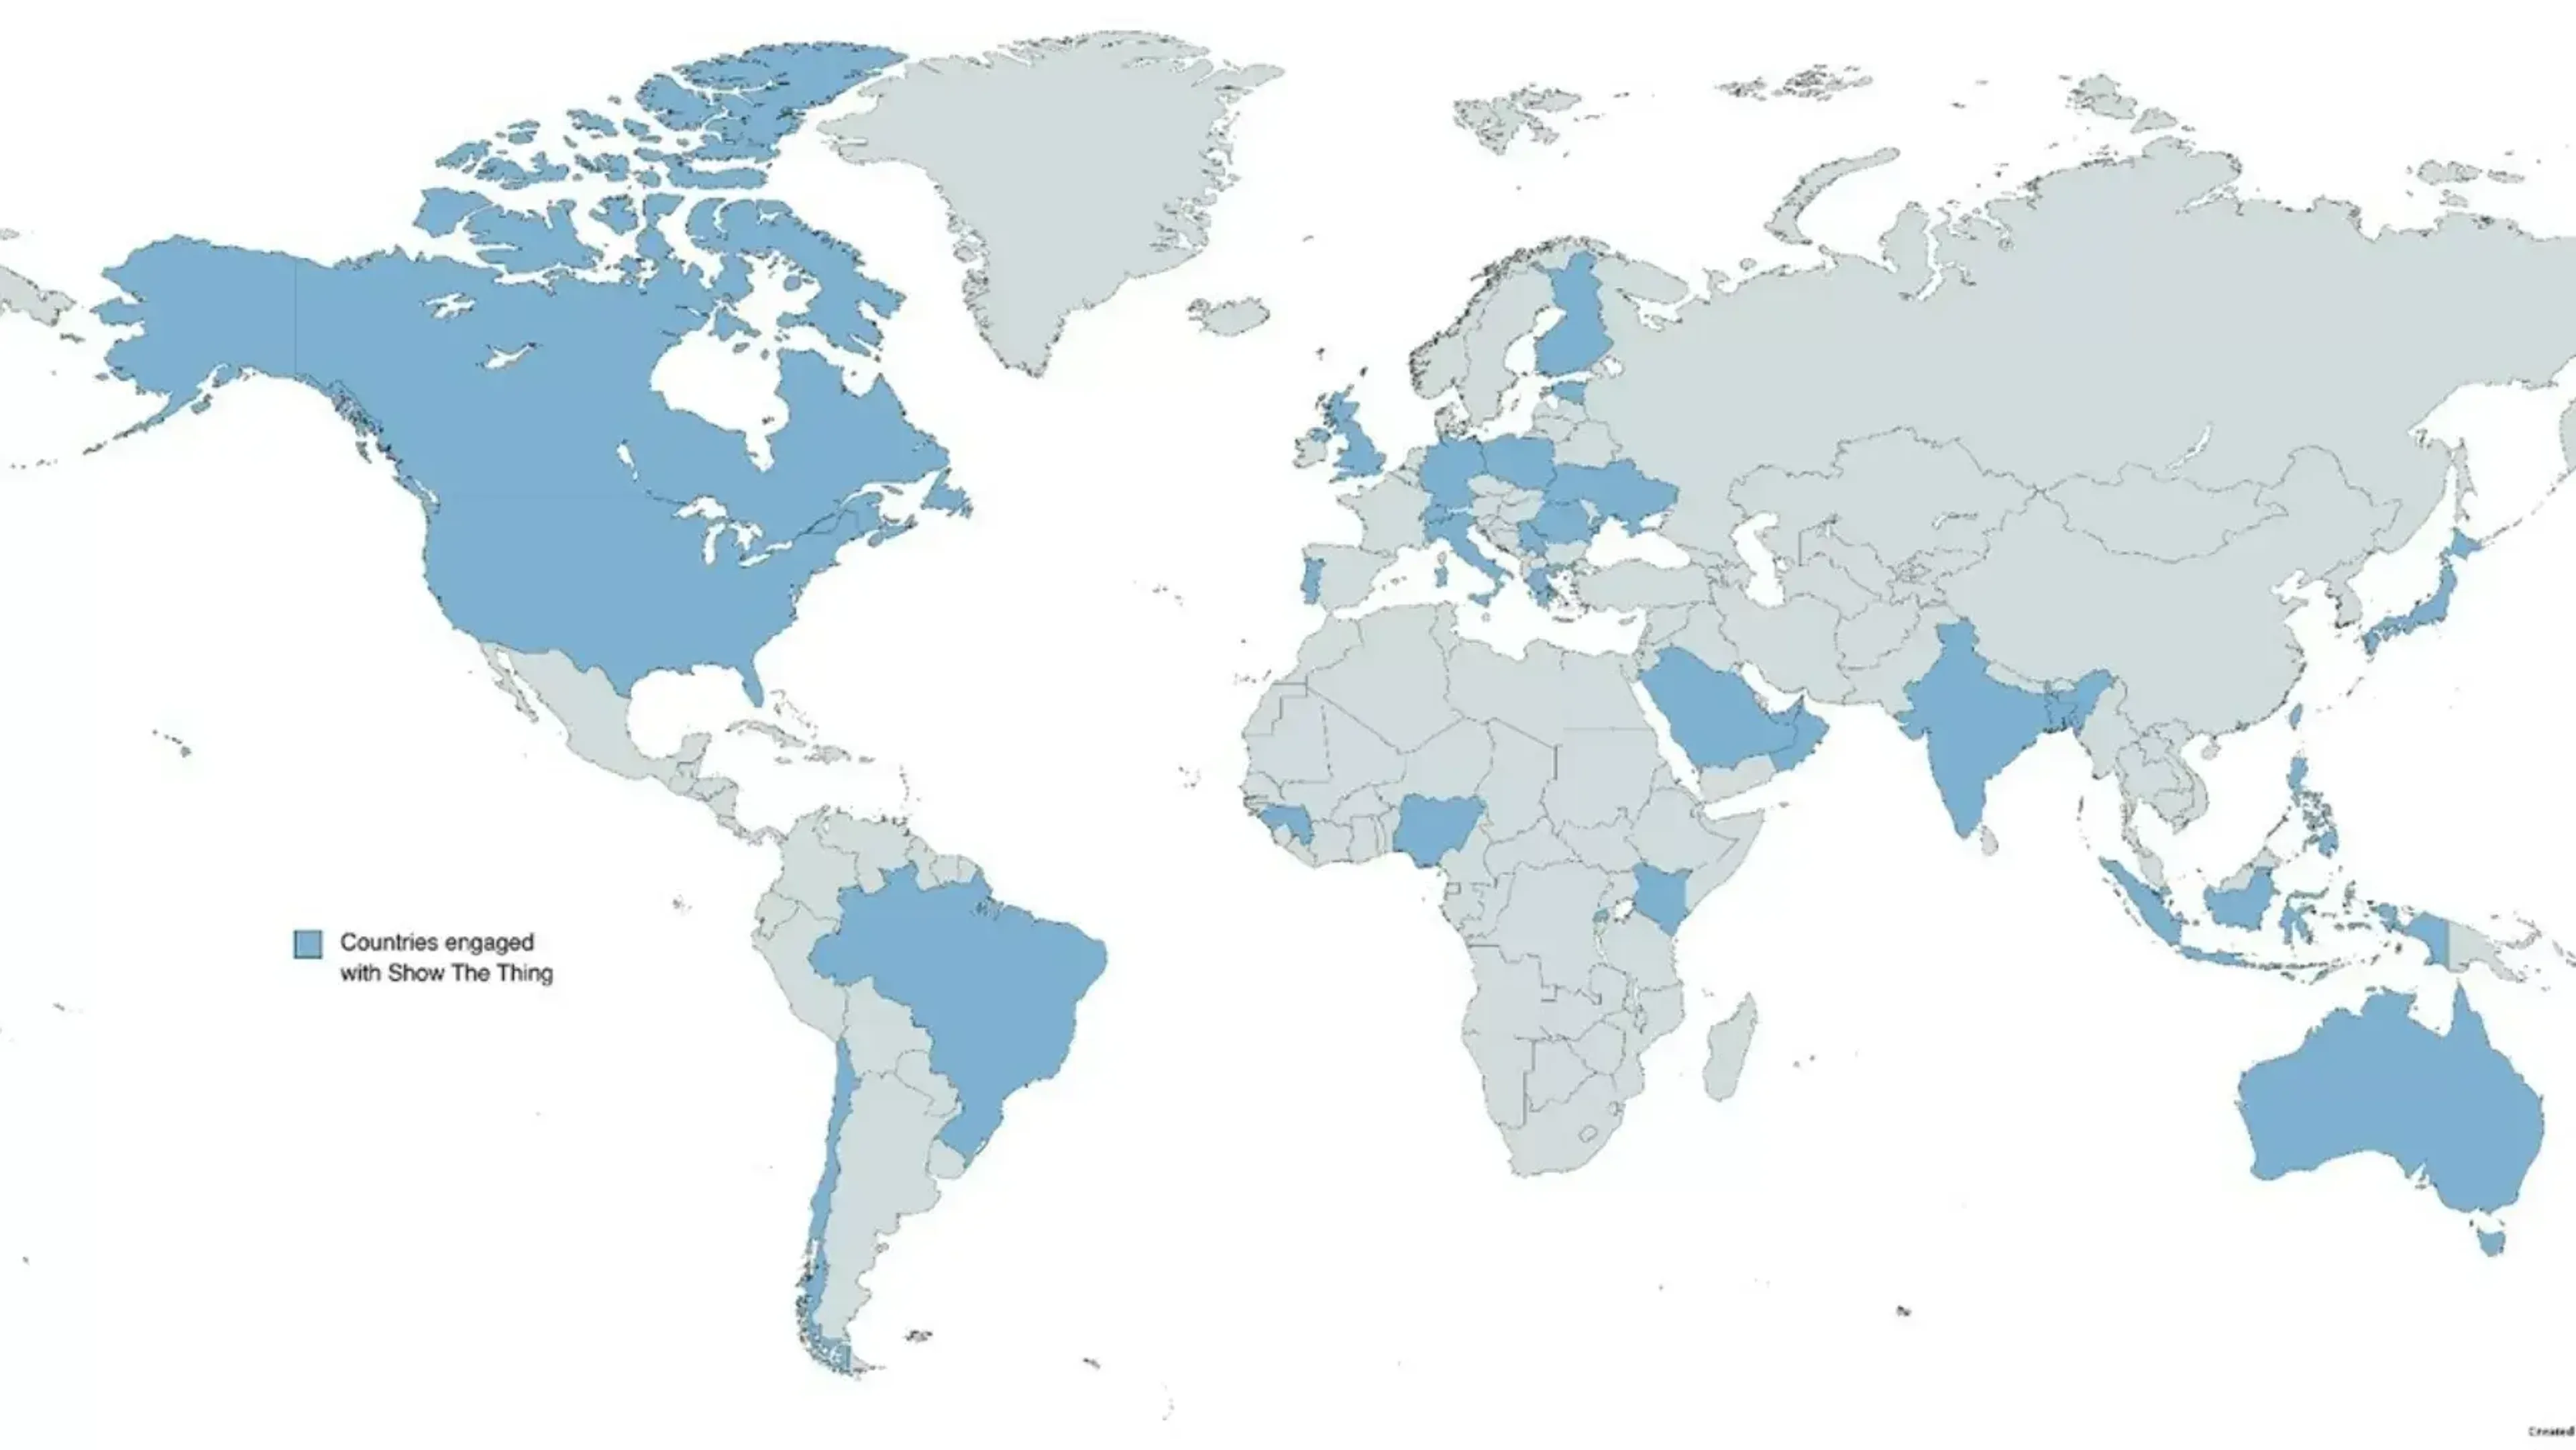 Map of countries engaged so far in our Show the Thing series